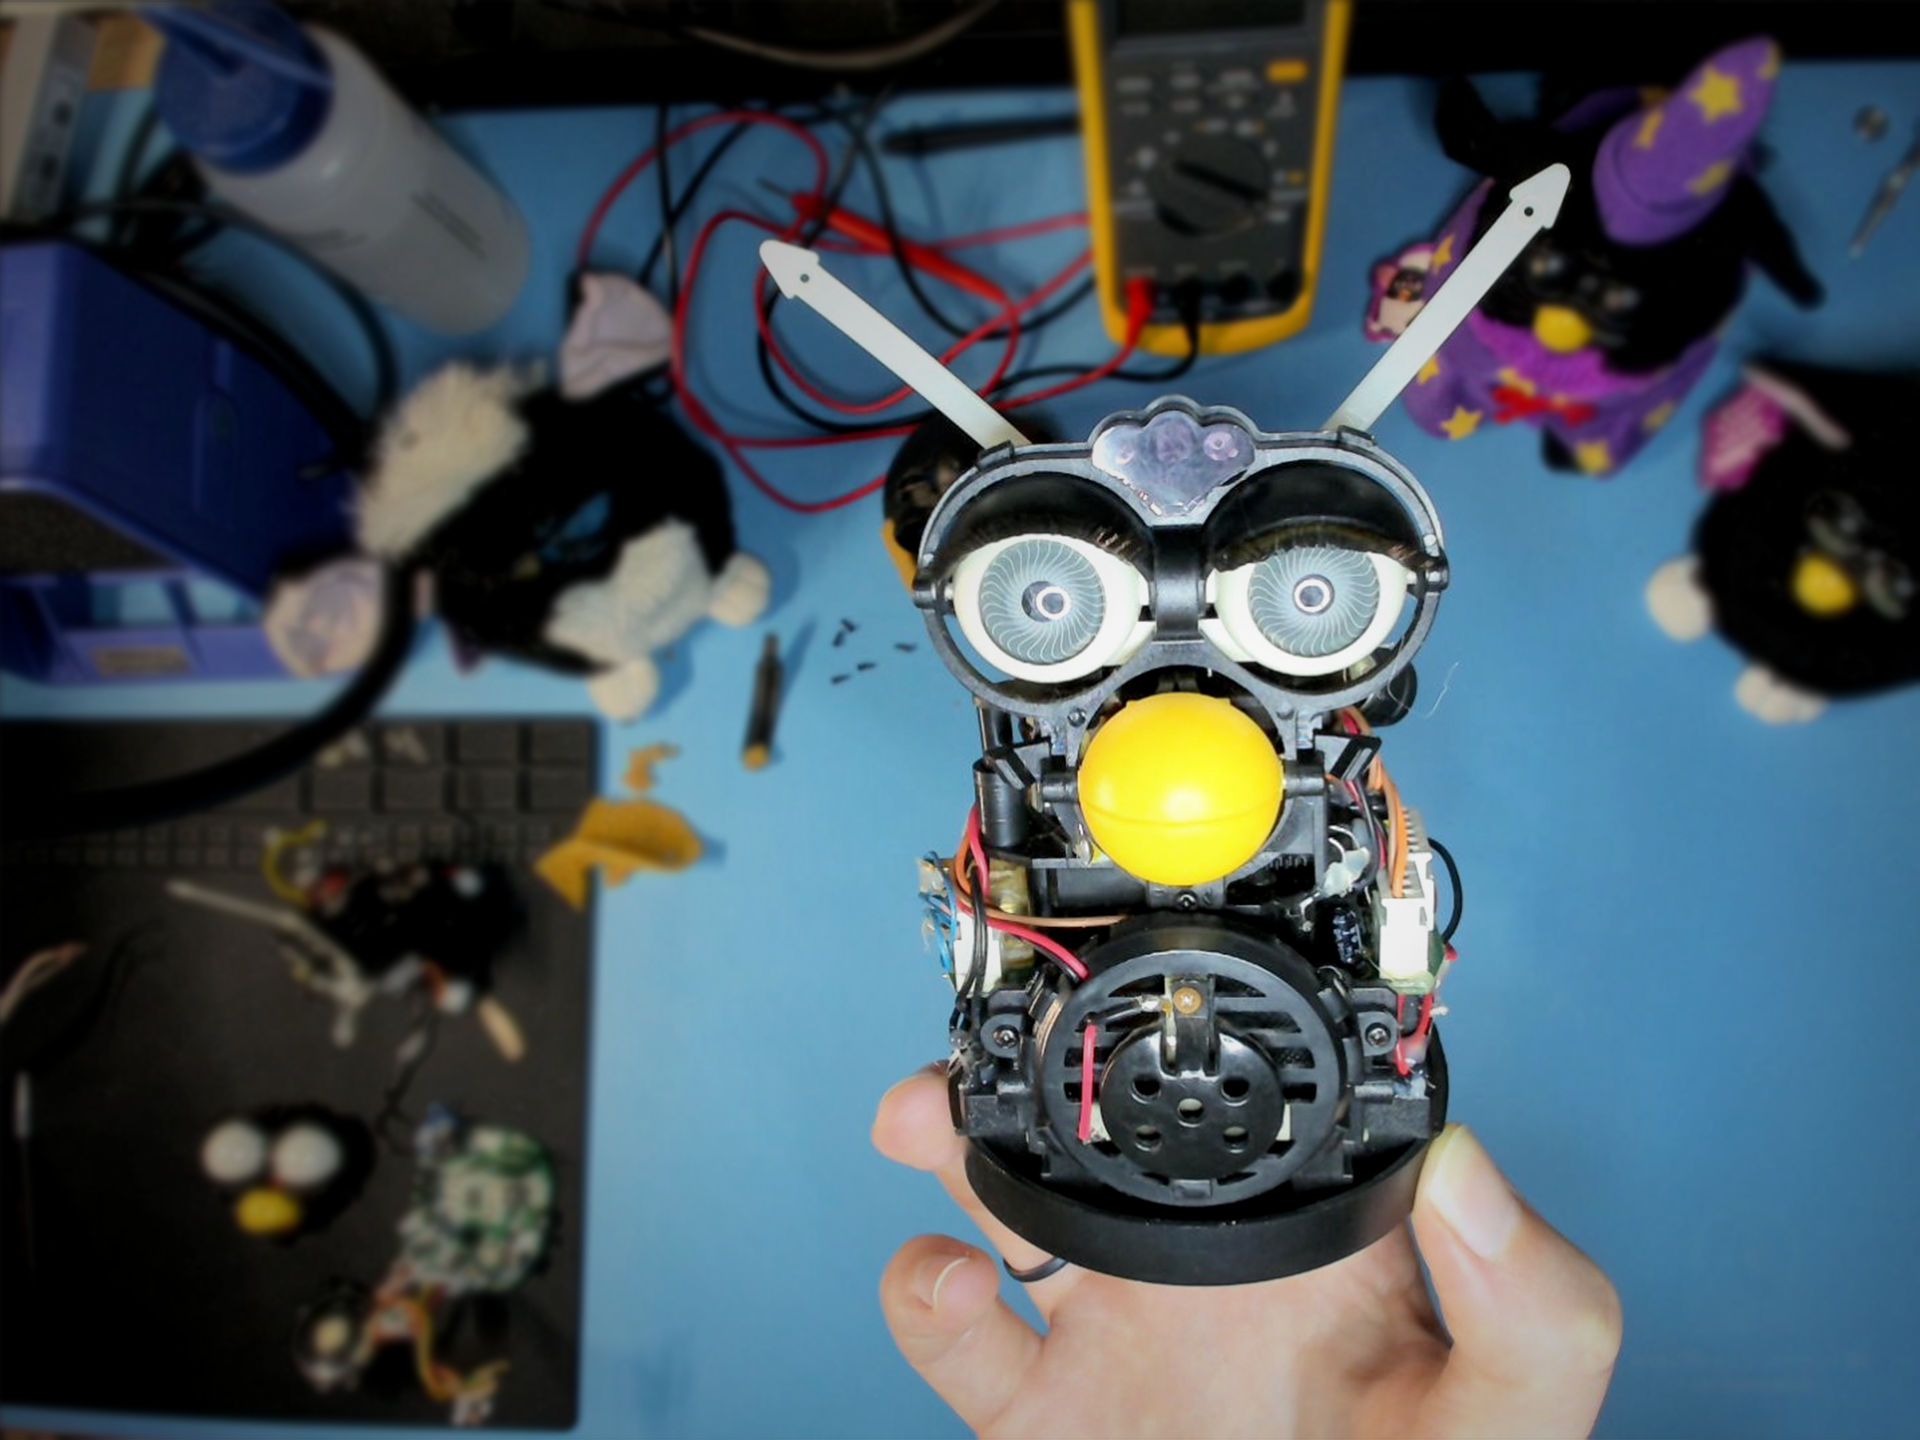 Furby Product Teardown: Why Embedded Systems Engineering and Human-Centered Design go Hand-in-Hand